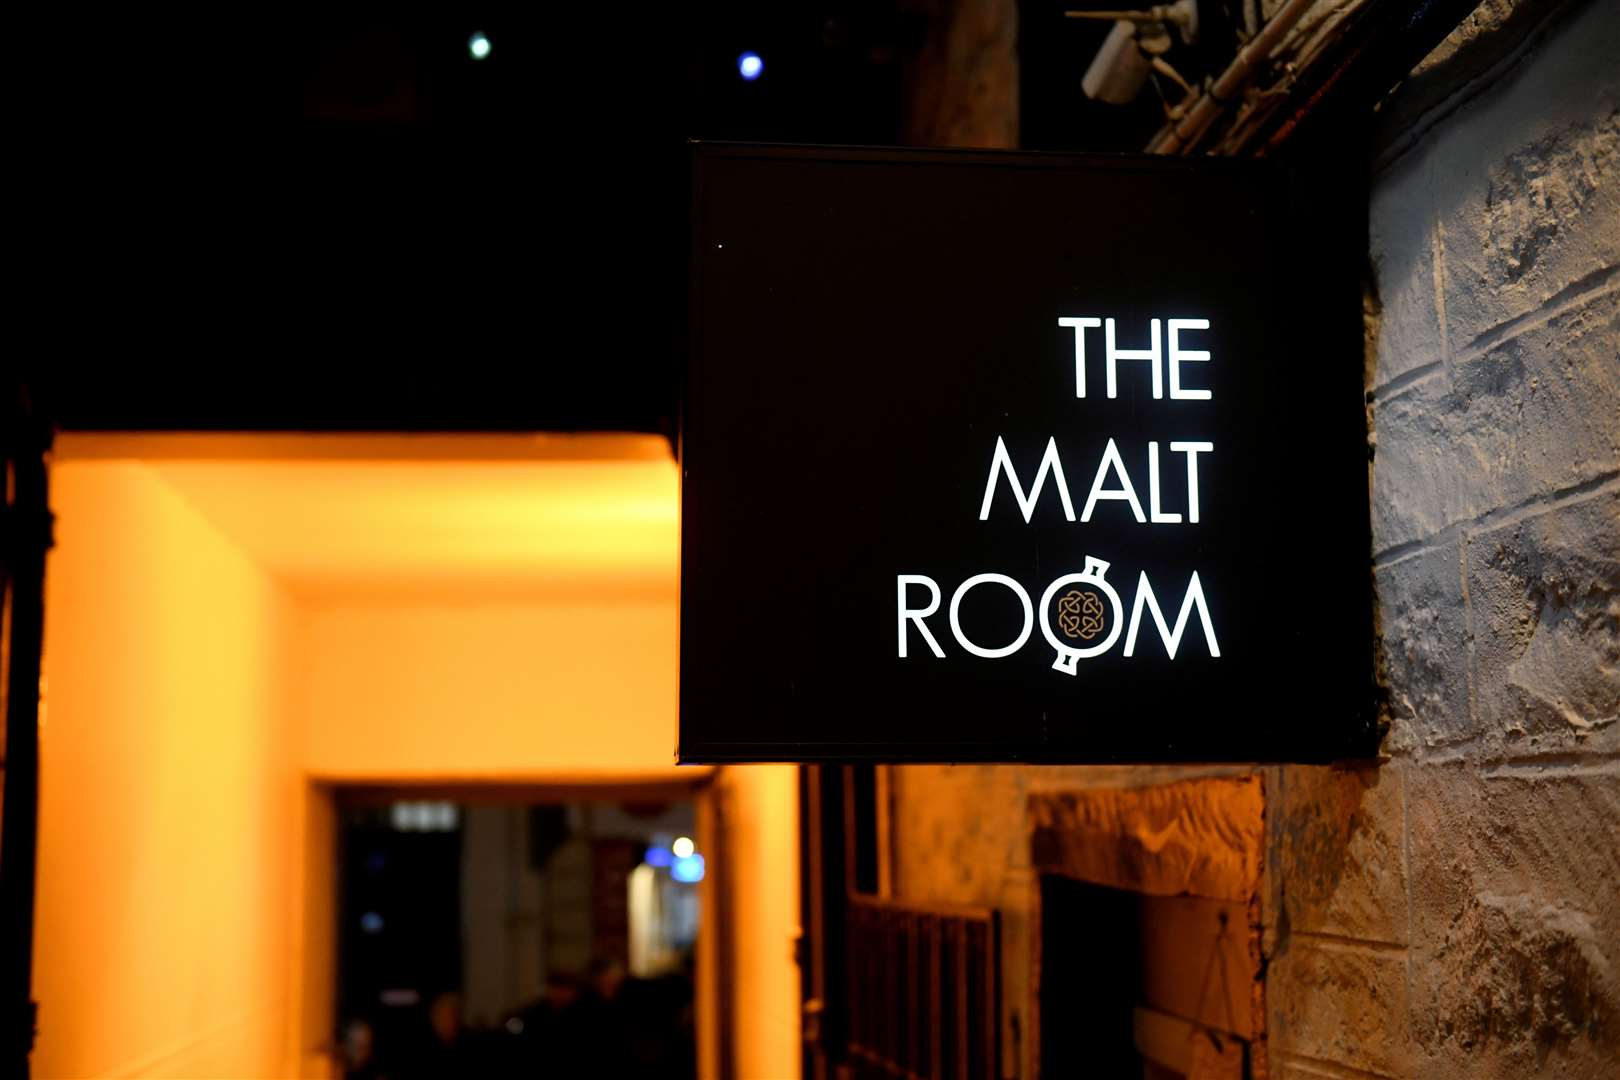 A man clashed with stewards at The Malt Room pub in Inverness.